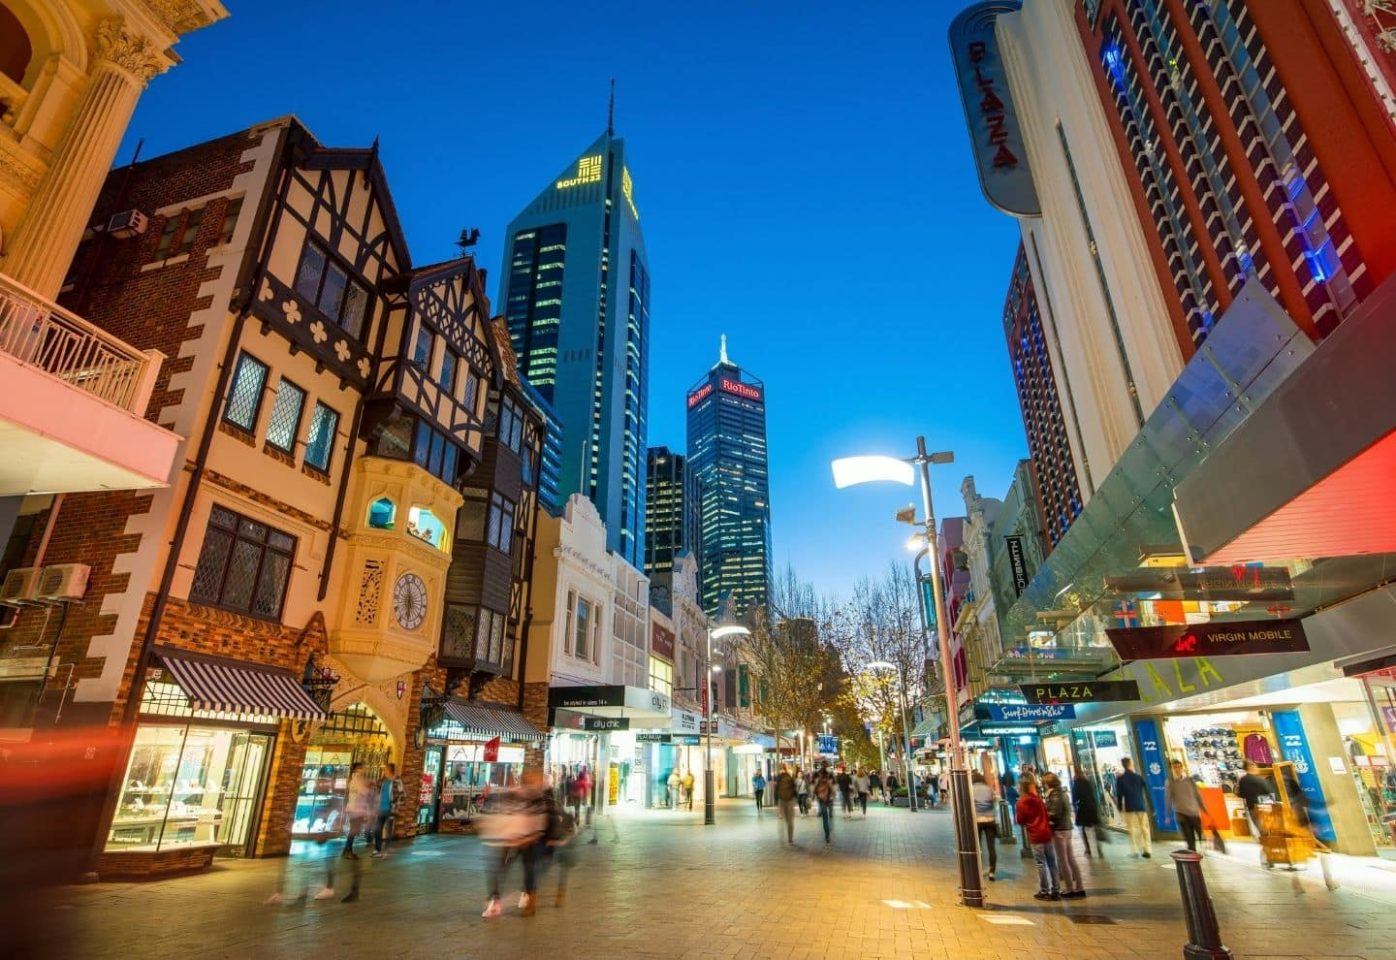 Hay street pedestrian shopping area in downtown Perth